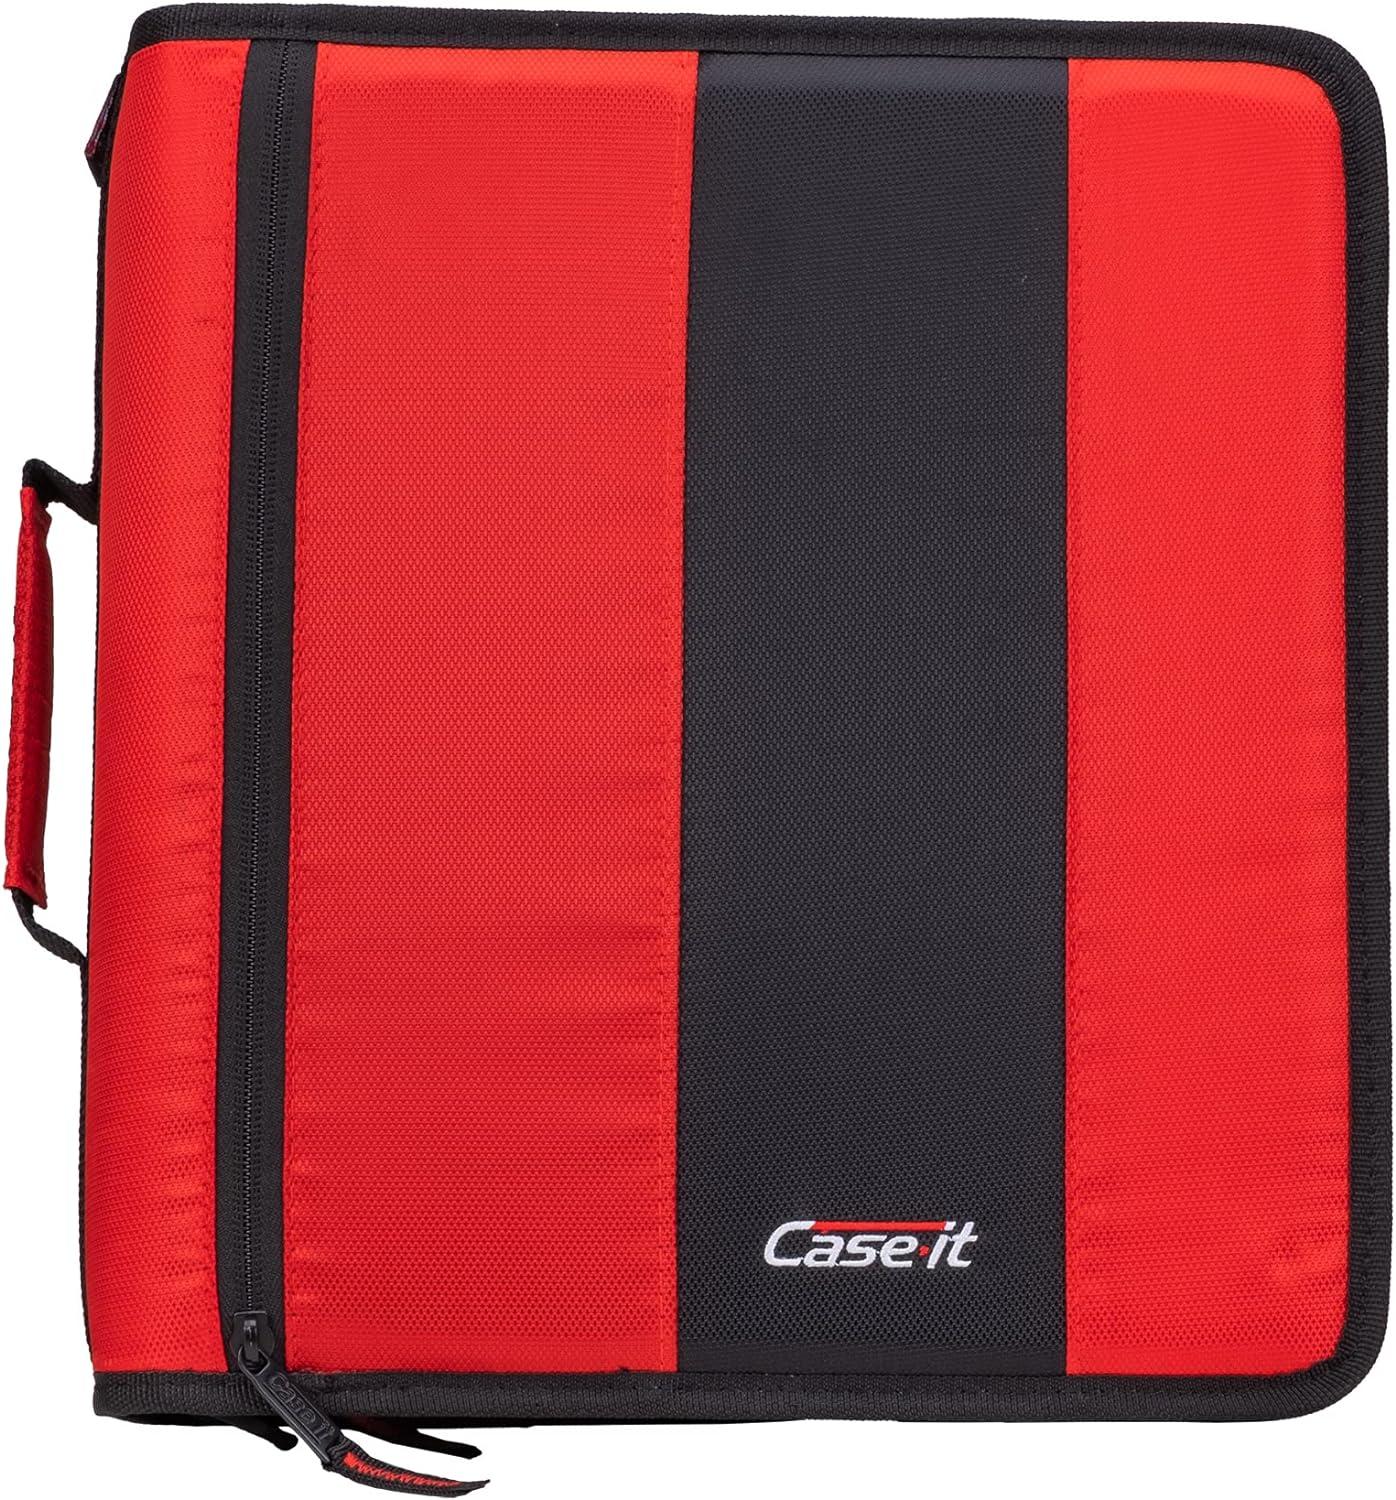 case-it the classic zipper binder - 2 inch o-rings - multiple pockets - 800 sheet capacity - comes with